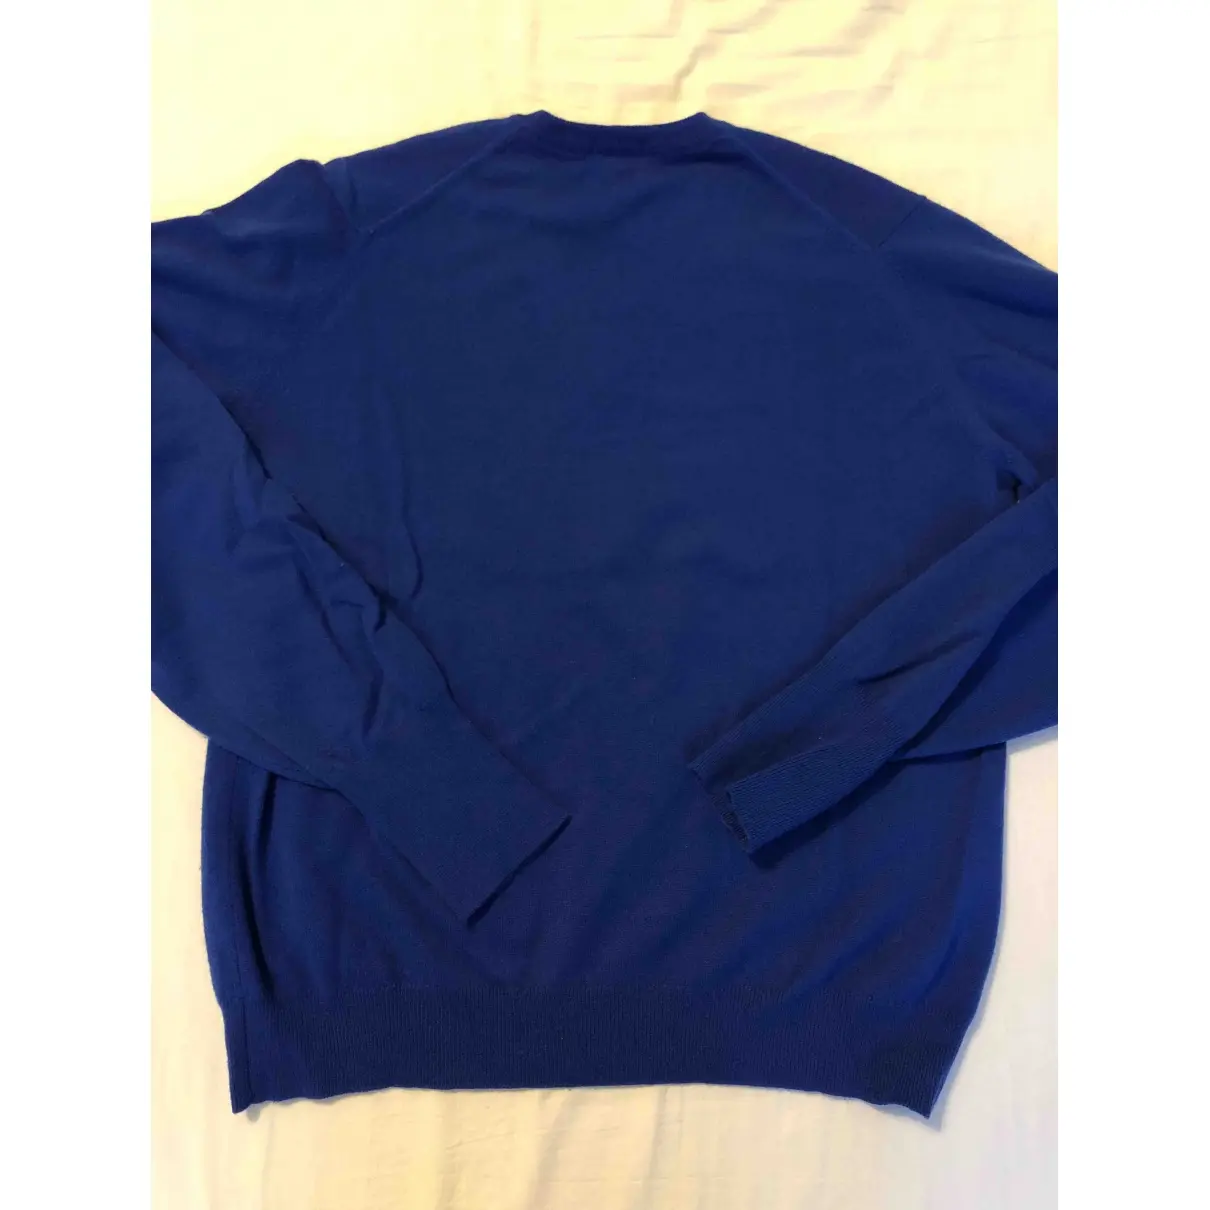 Ballantyne Cashmere pull for sale